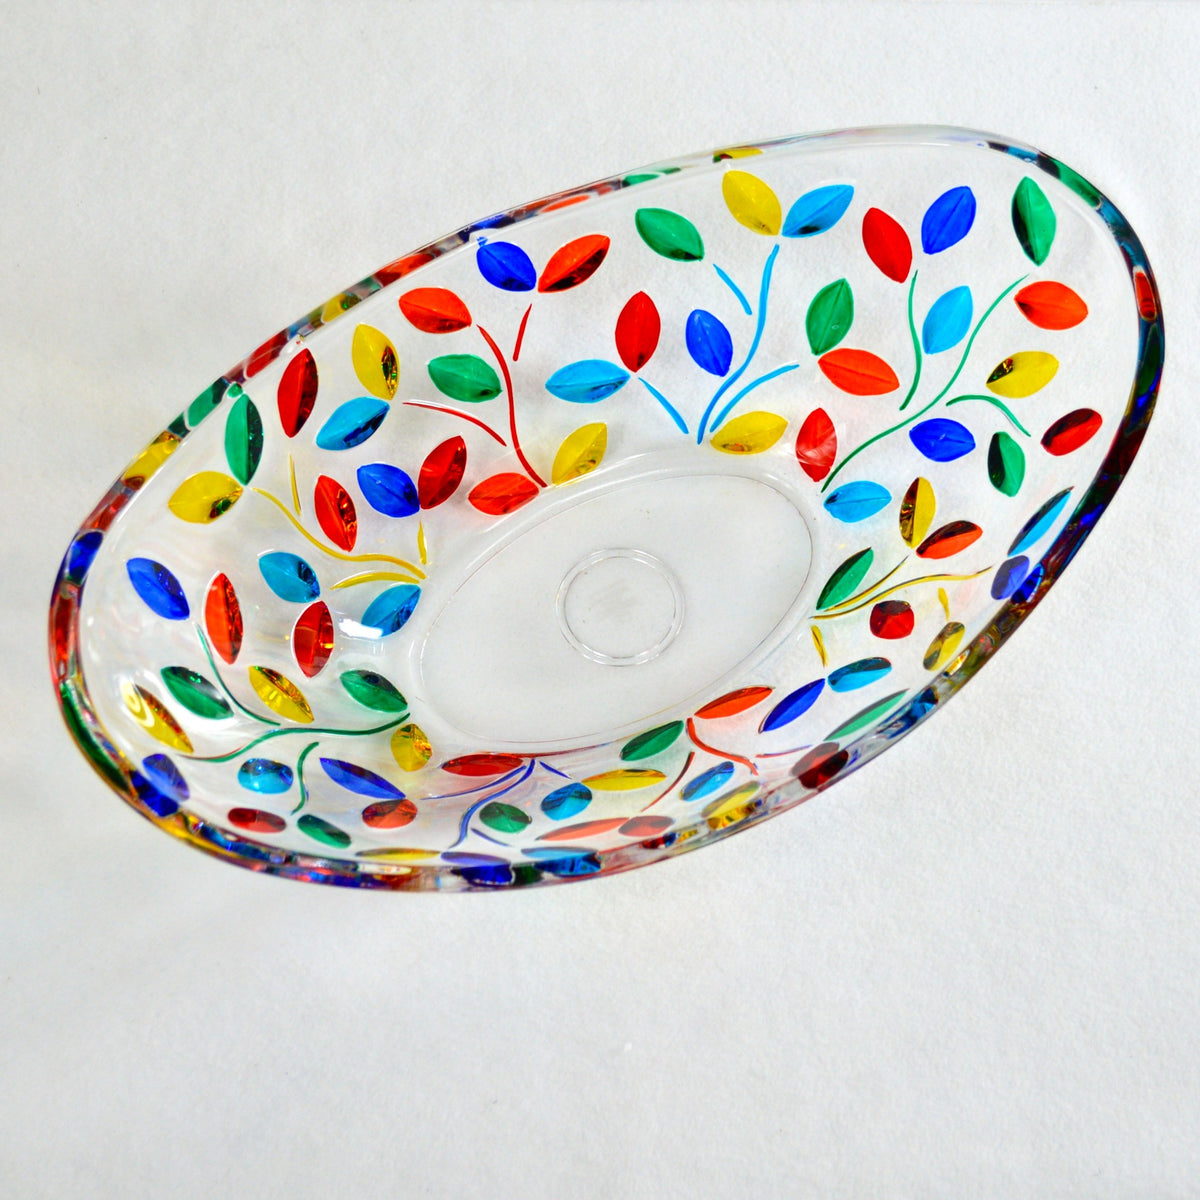 Flowervine Oval Glass Bowl, Handmade and Painted in Italy - My Italian Decor